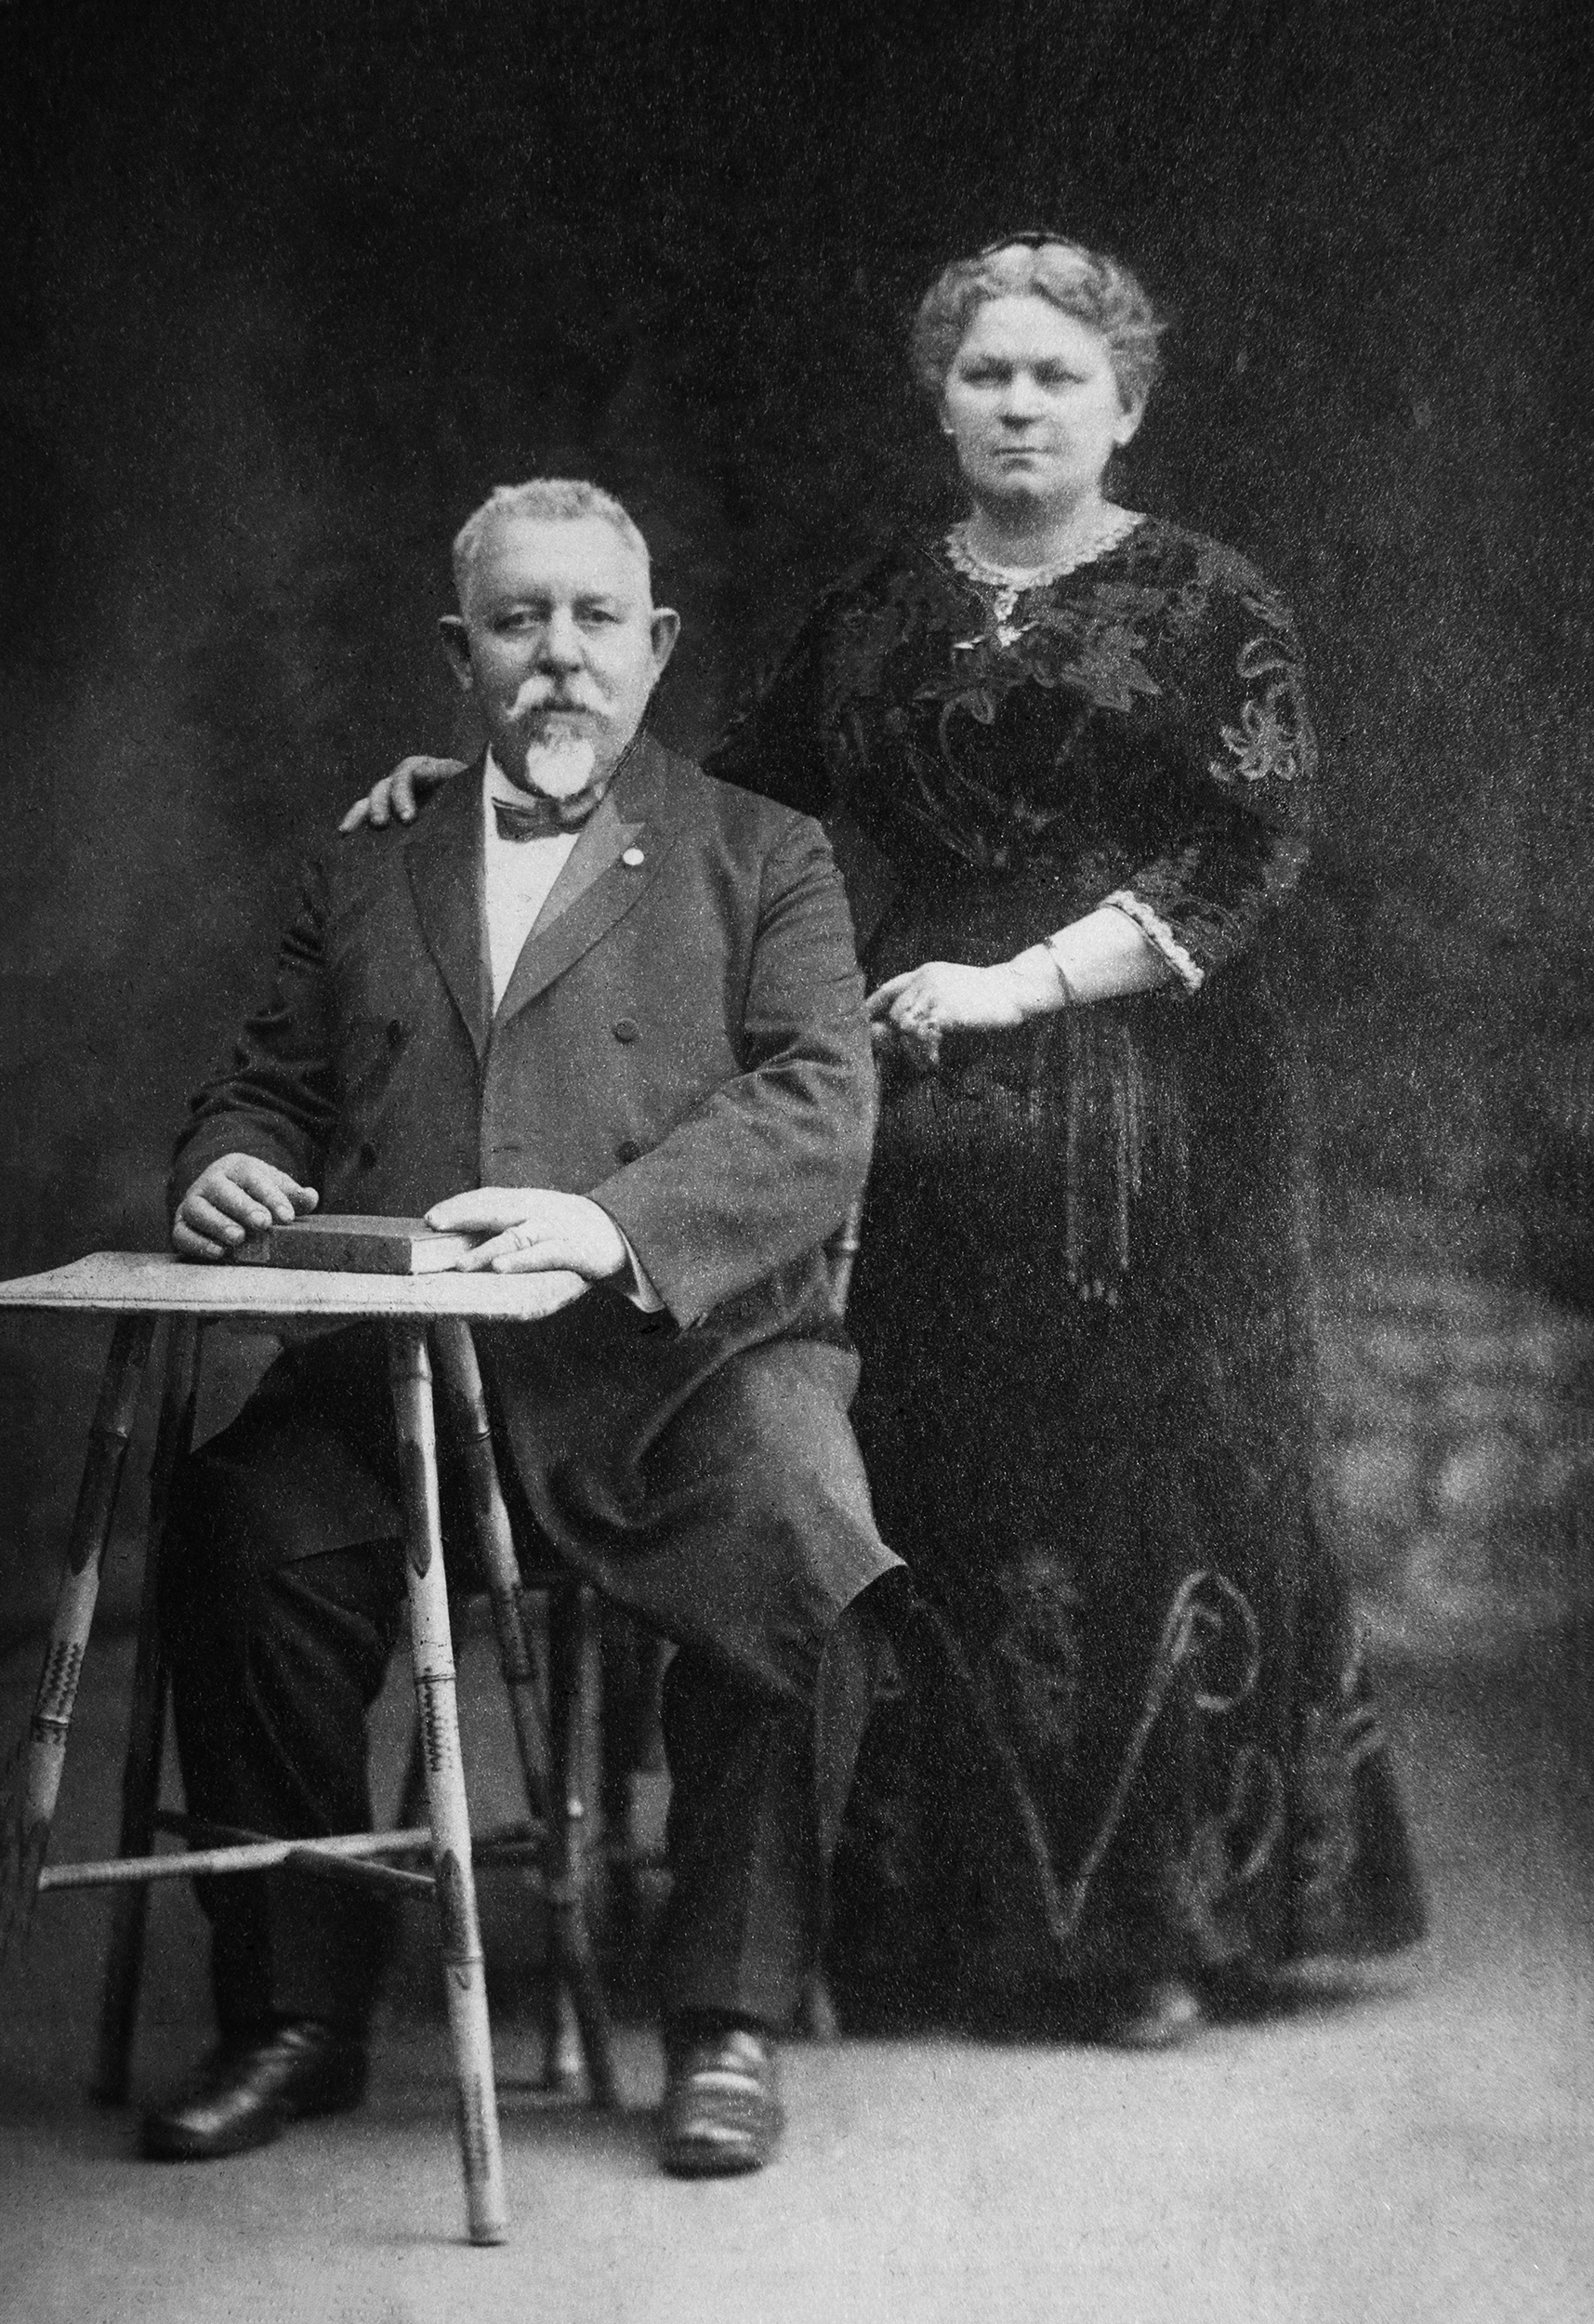 Dora Adalman's mother and her mother's second husband